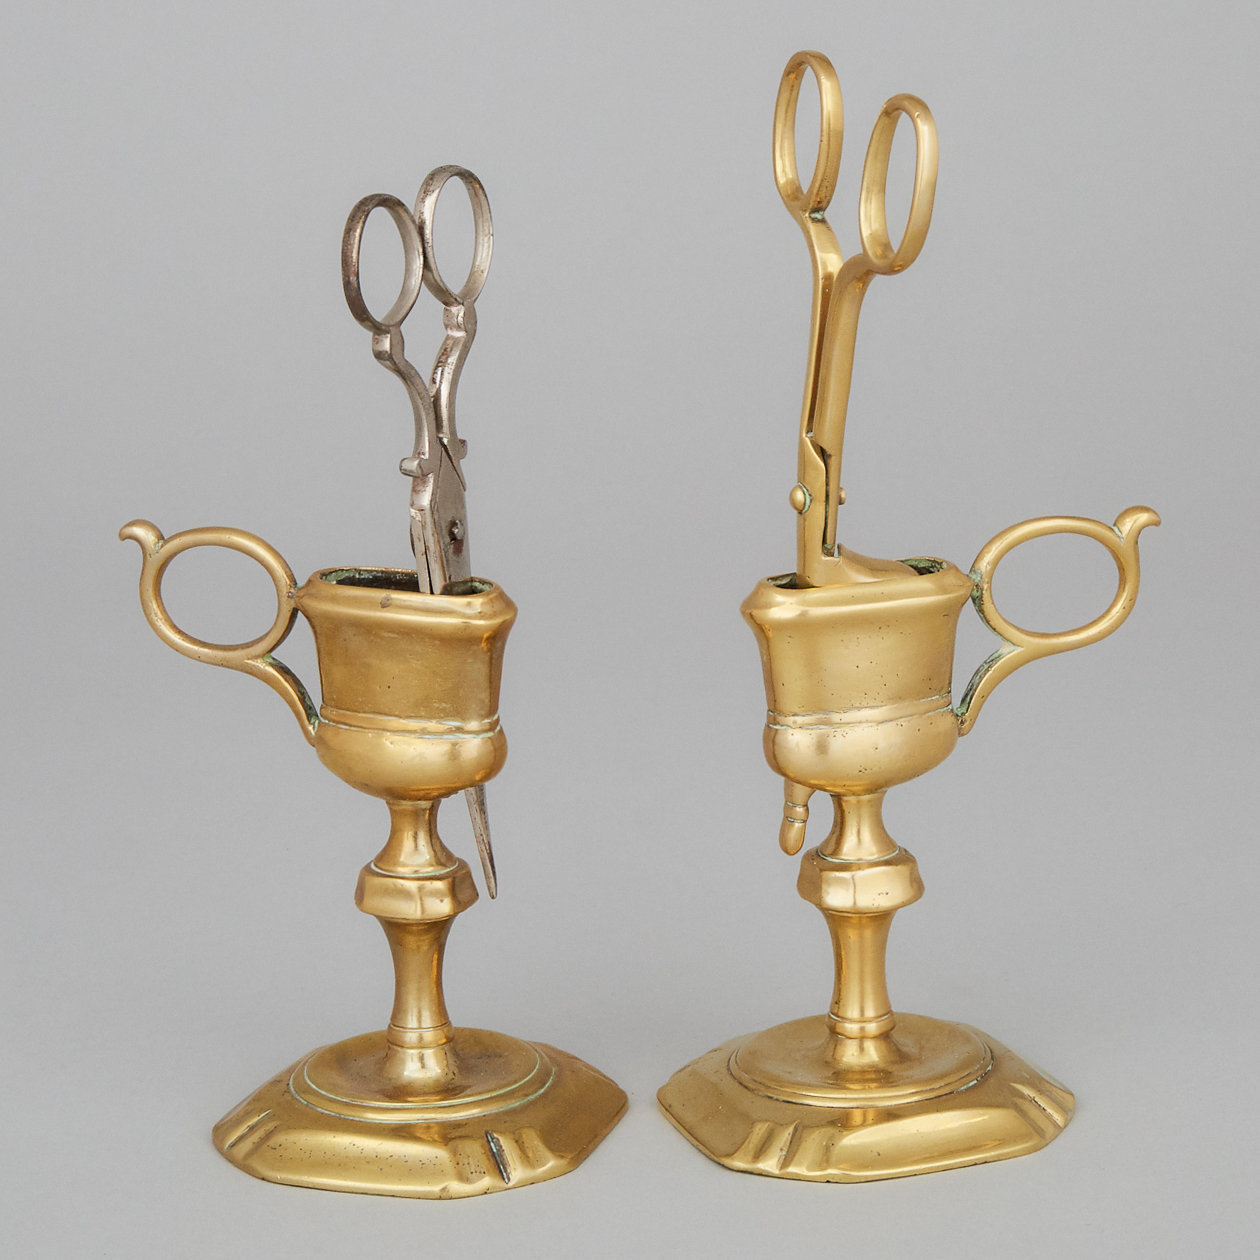 Pair of Georgian Brass Candle Wick Trimmers on Stands, mid 18th century